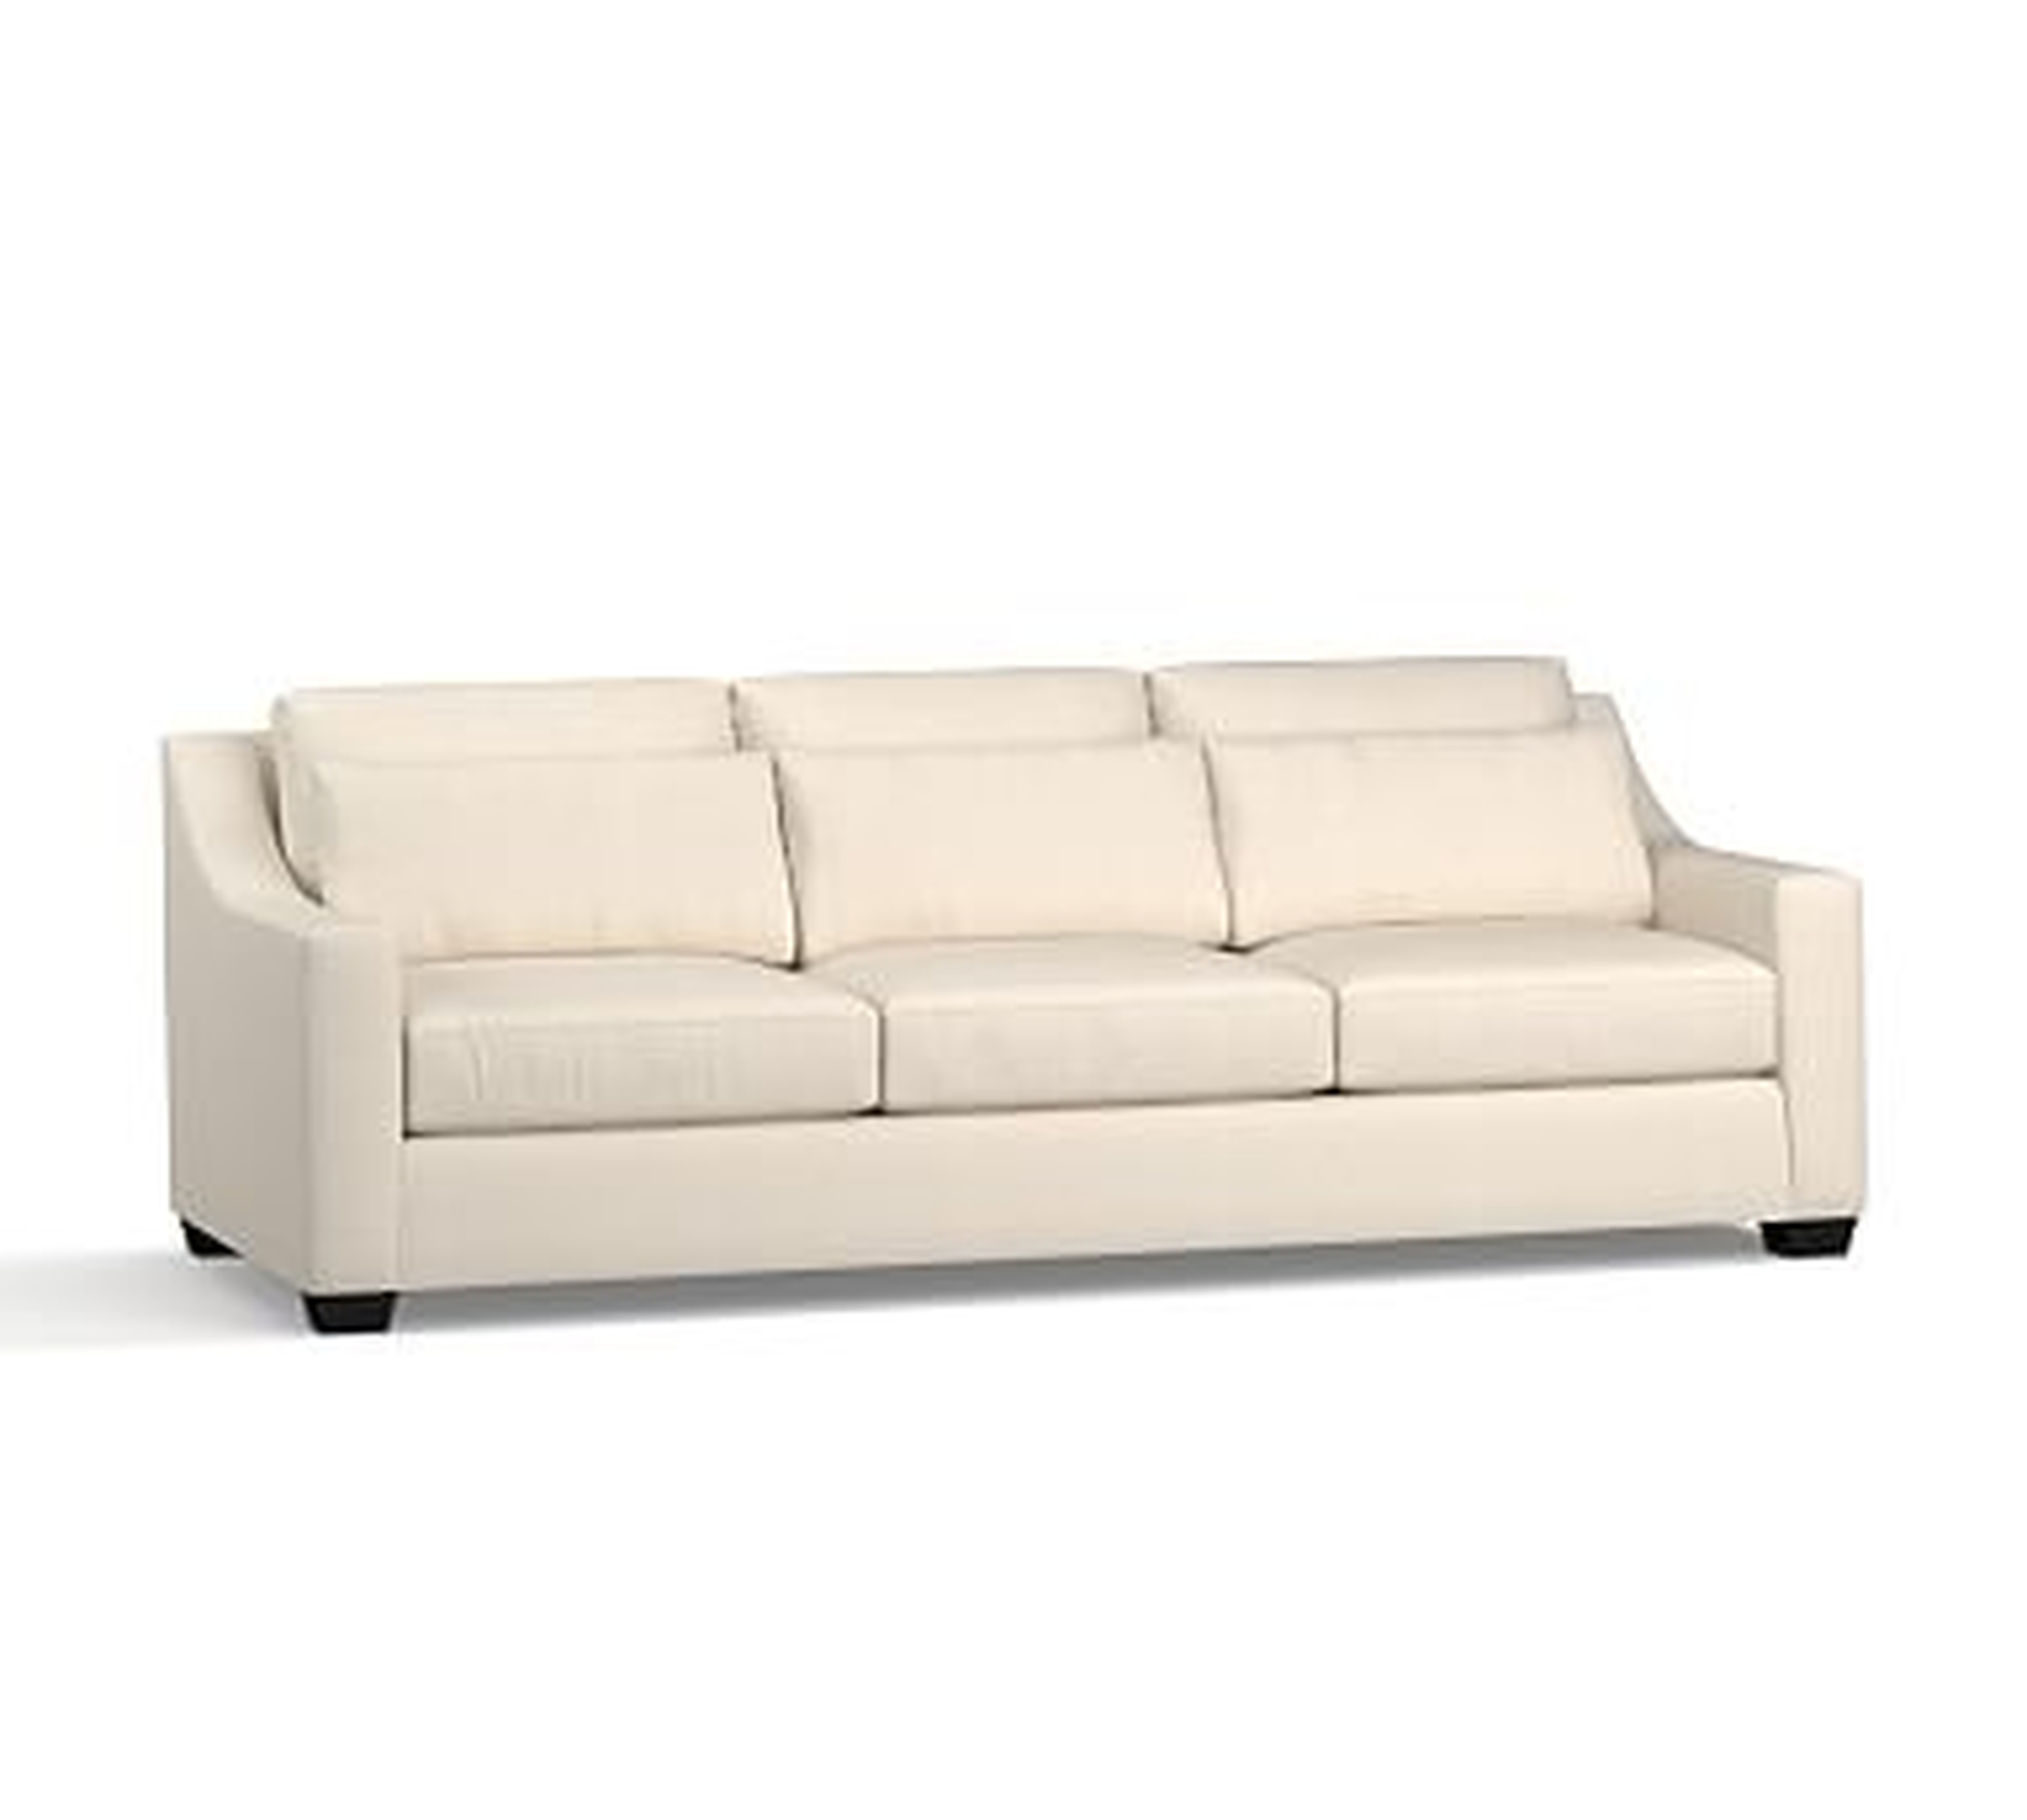 York Slope Arm Upholstered Deep Seat Grand Sofa 95" 3-Seater, Down Blend Wrapped Cushions, Sunbrella(R) Performance Sahara Weave Ivory - Pottery Barn